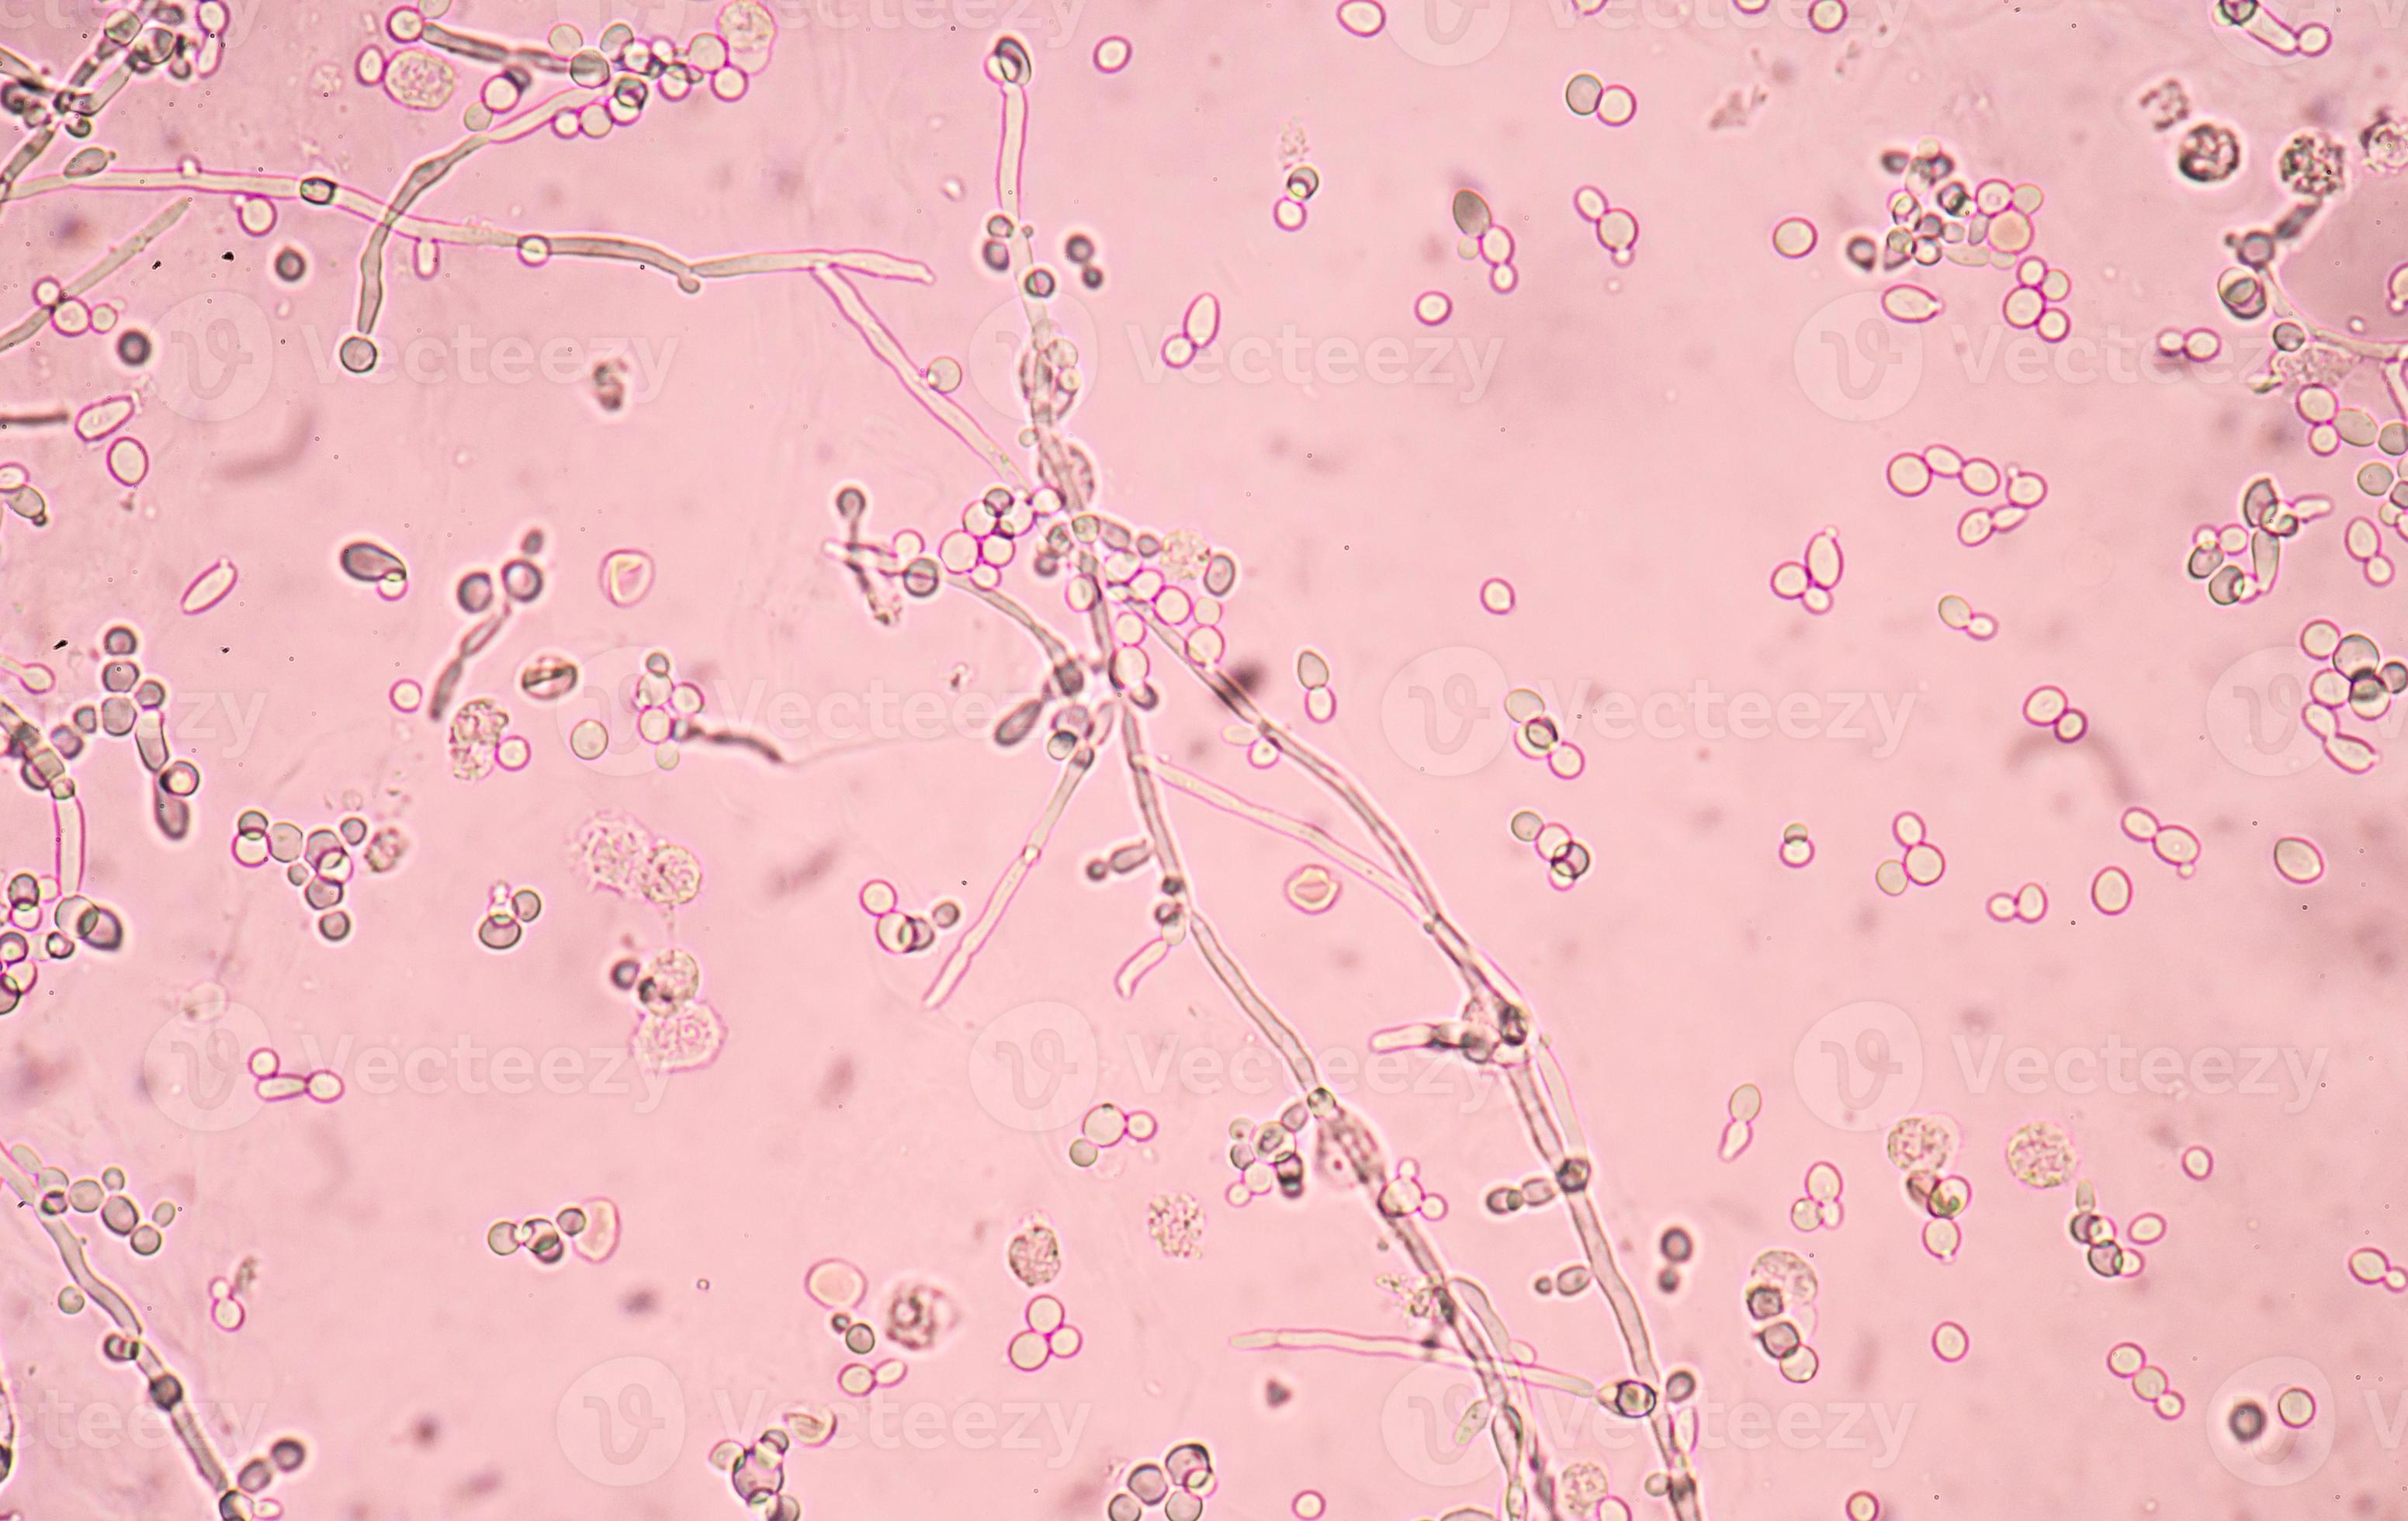 Budding Yeast Cells With Pseudohyphae 1083850 Stock Photo At Vecteezy